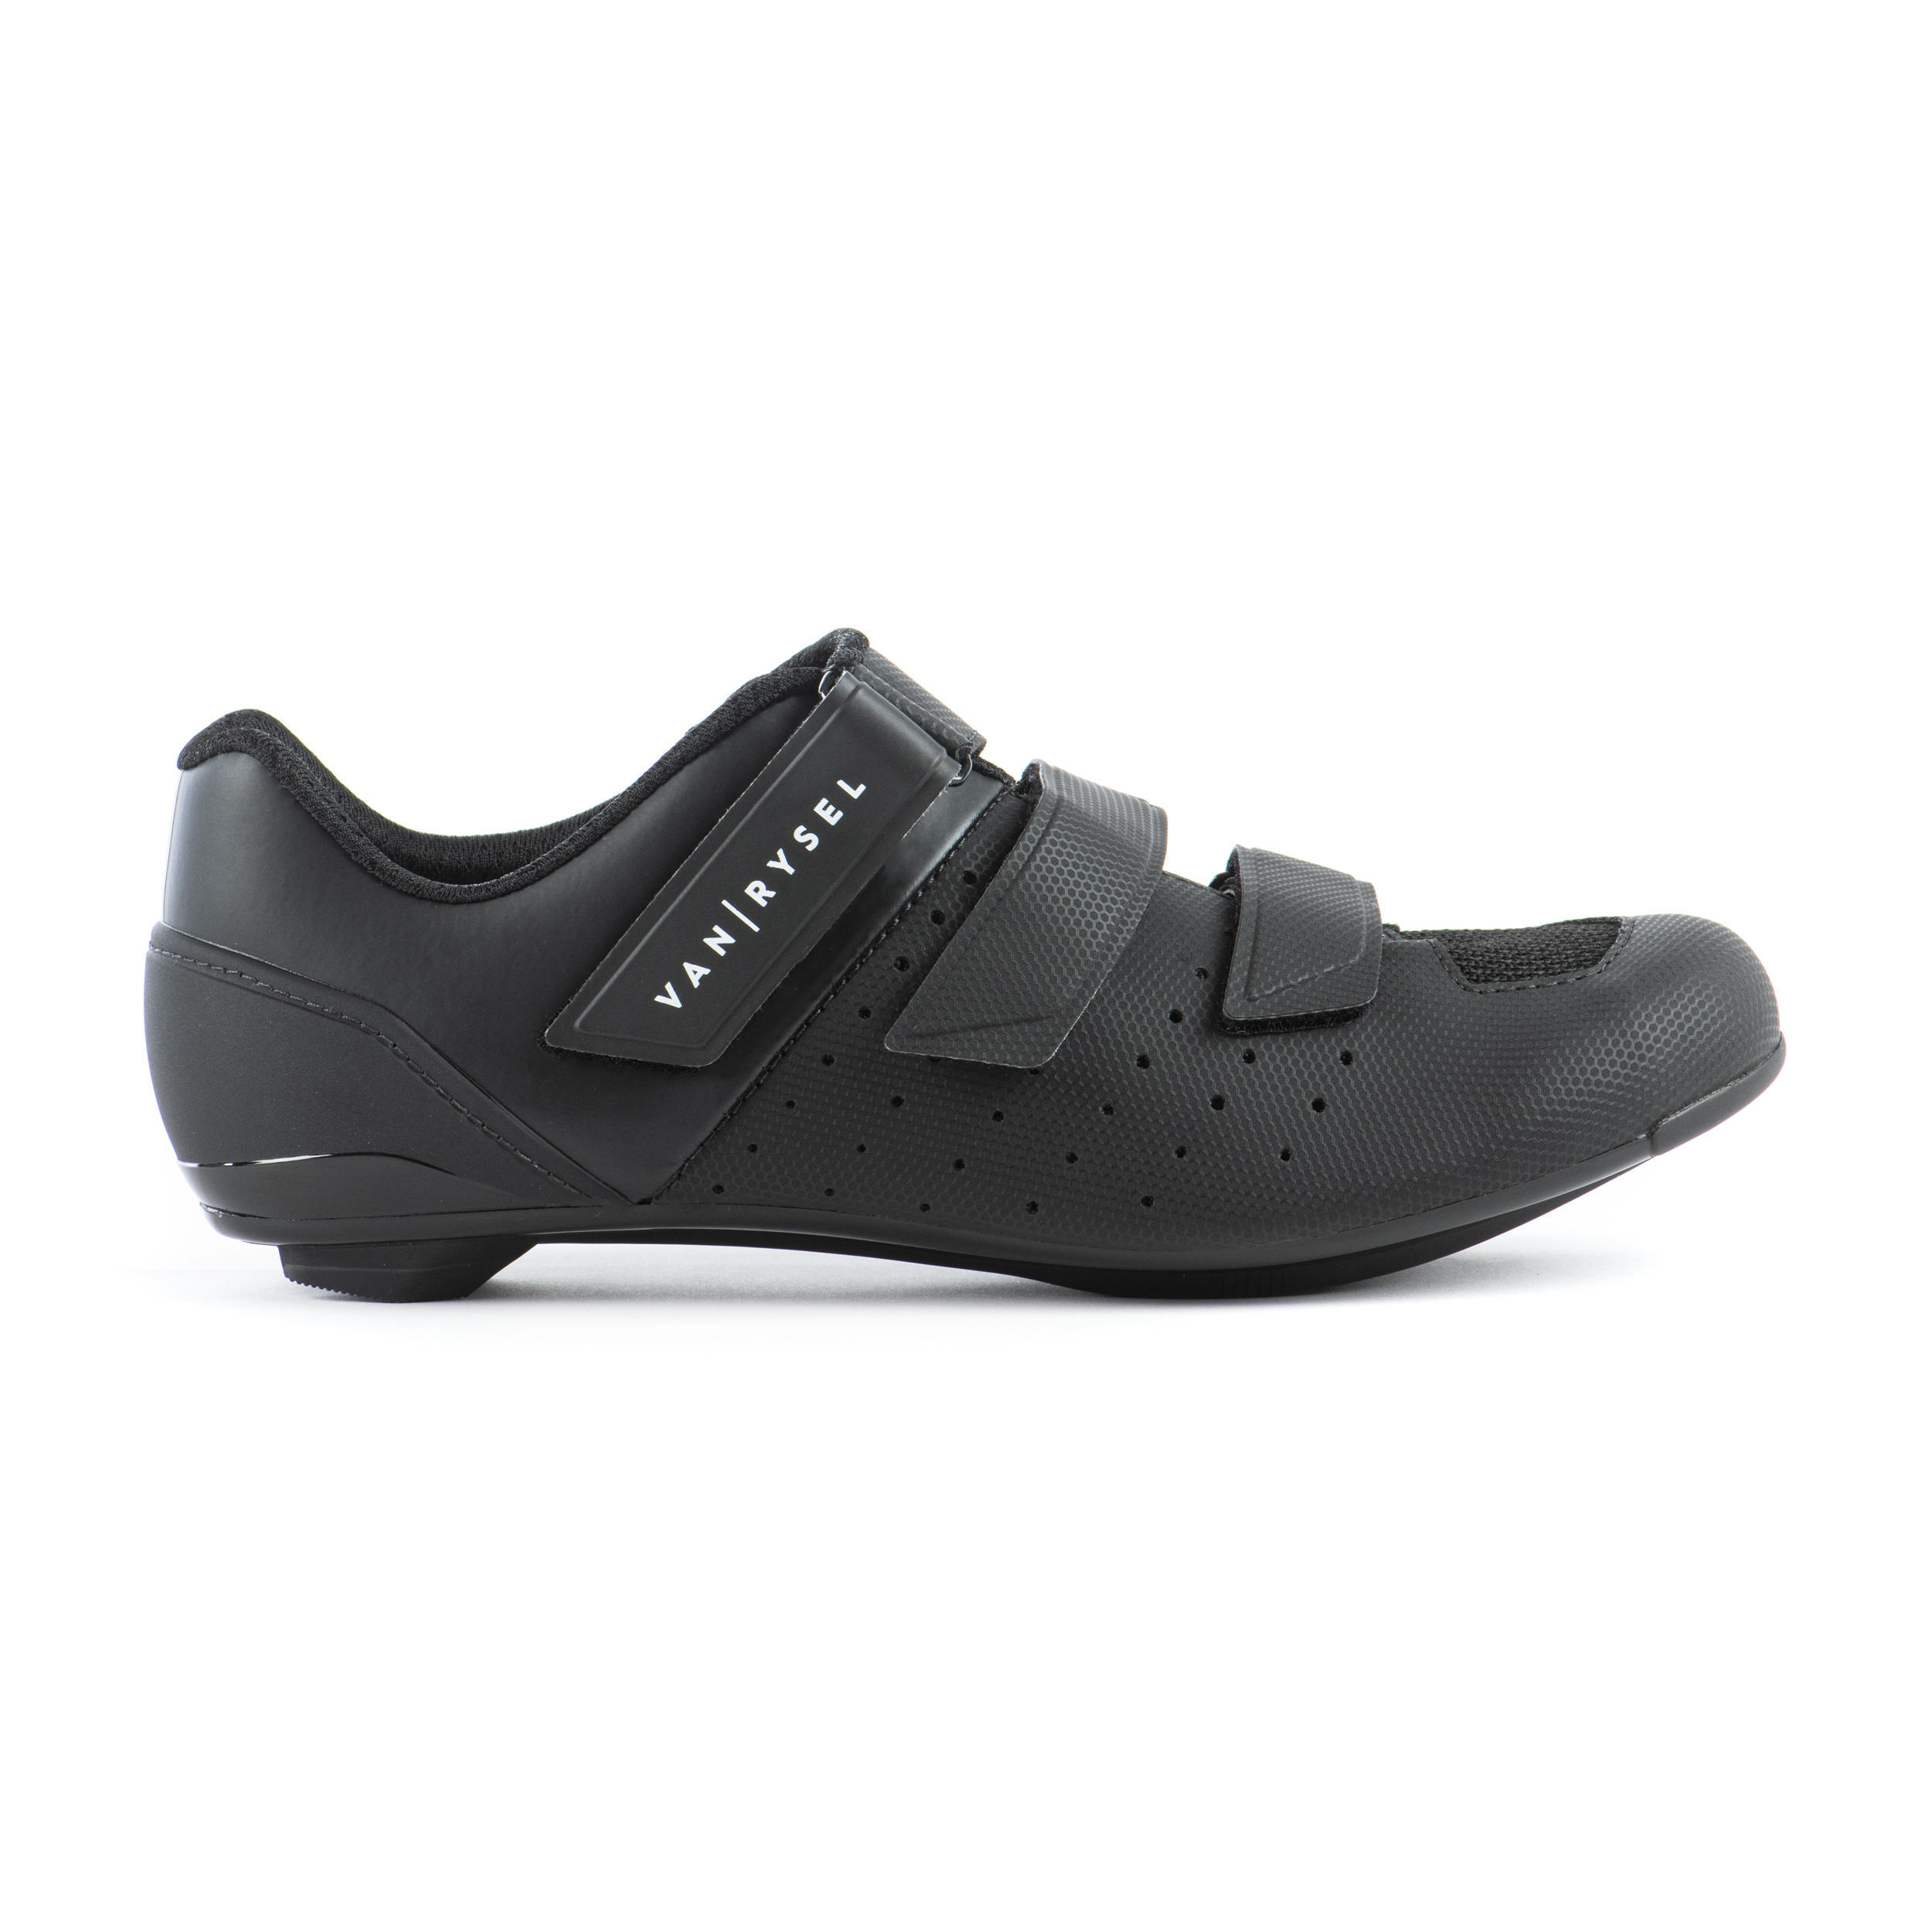 Sportive Road Cycling Shoes 500 - Black 3/4